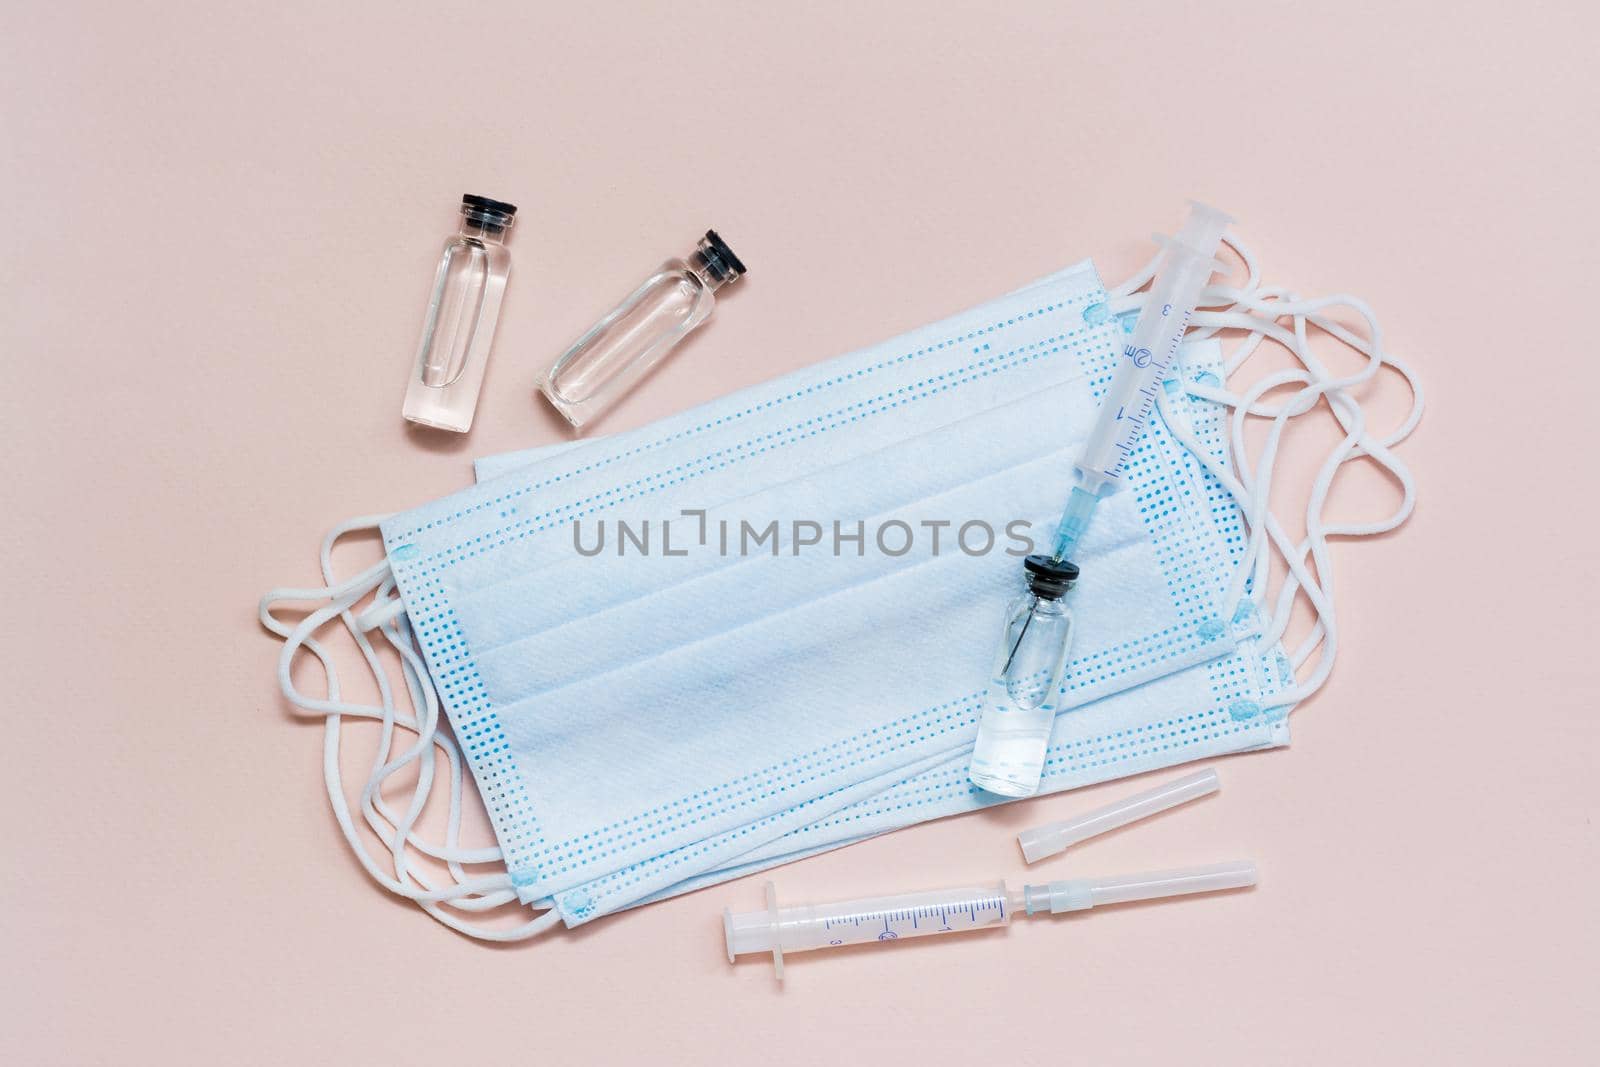 Vaccination and Immunization. Syringe needle inserted into a glass vial with vaccine on a face protective mask and other vials and syringes. Top view by Aleruana